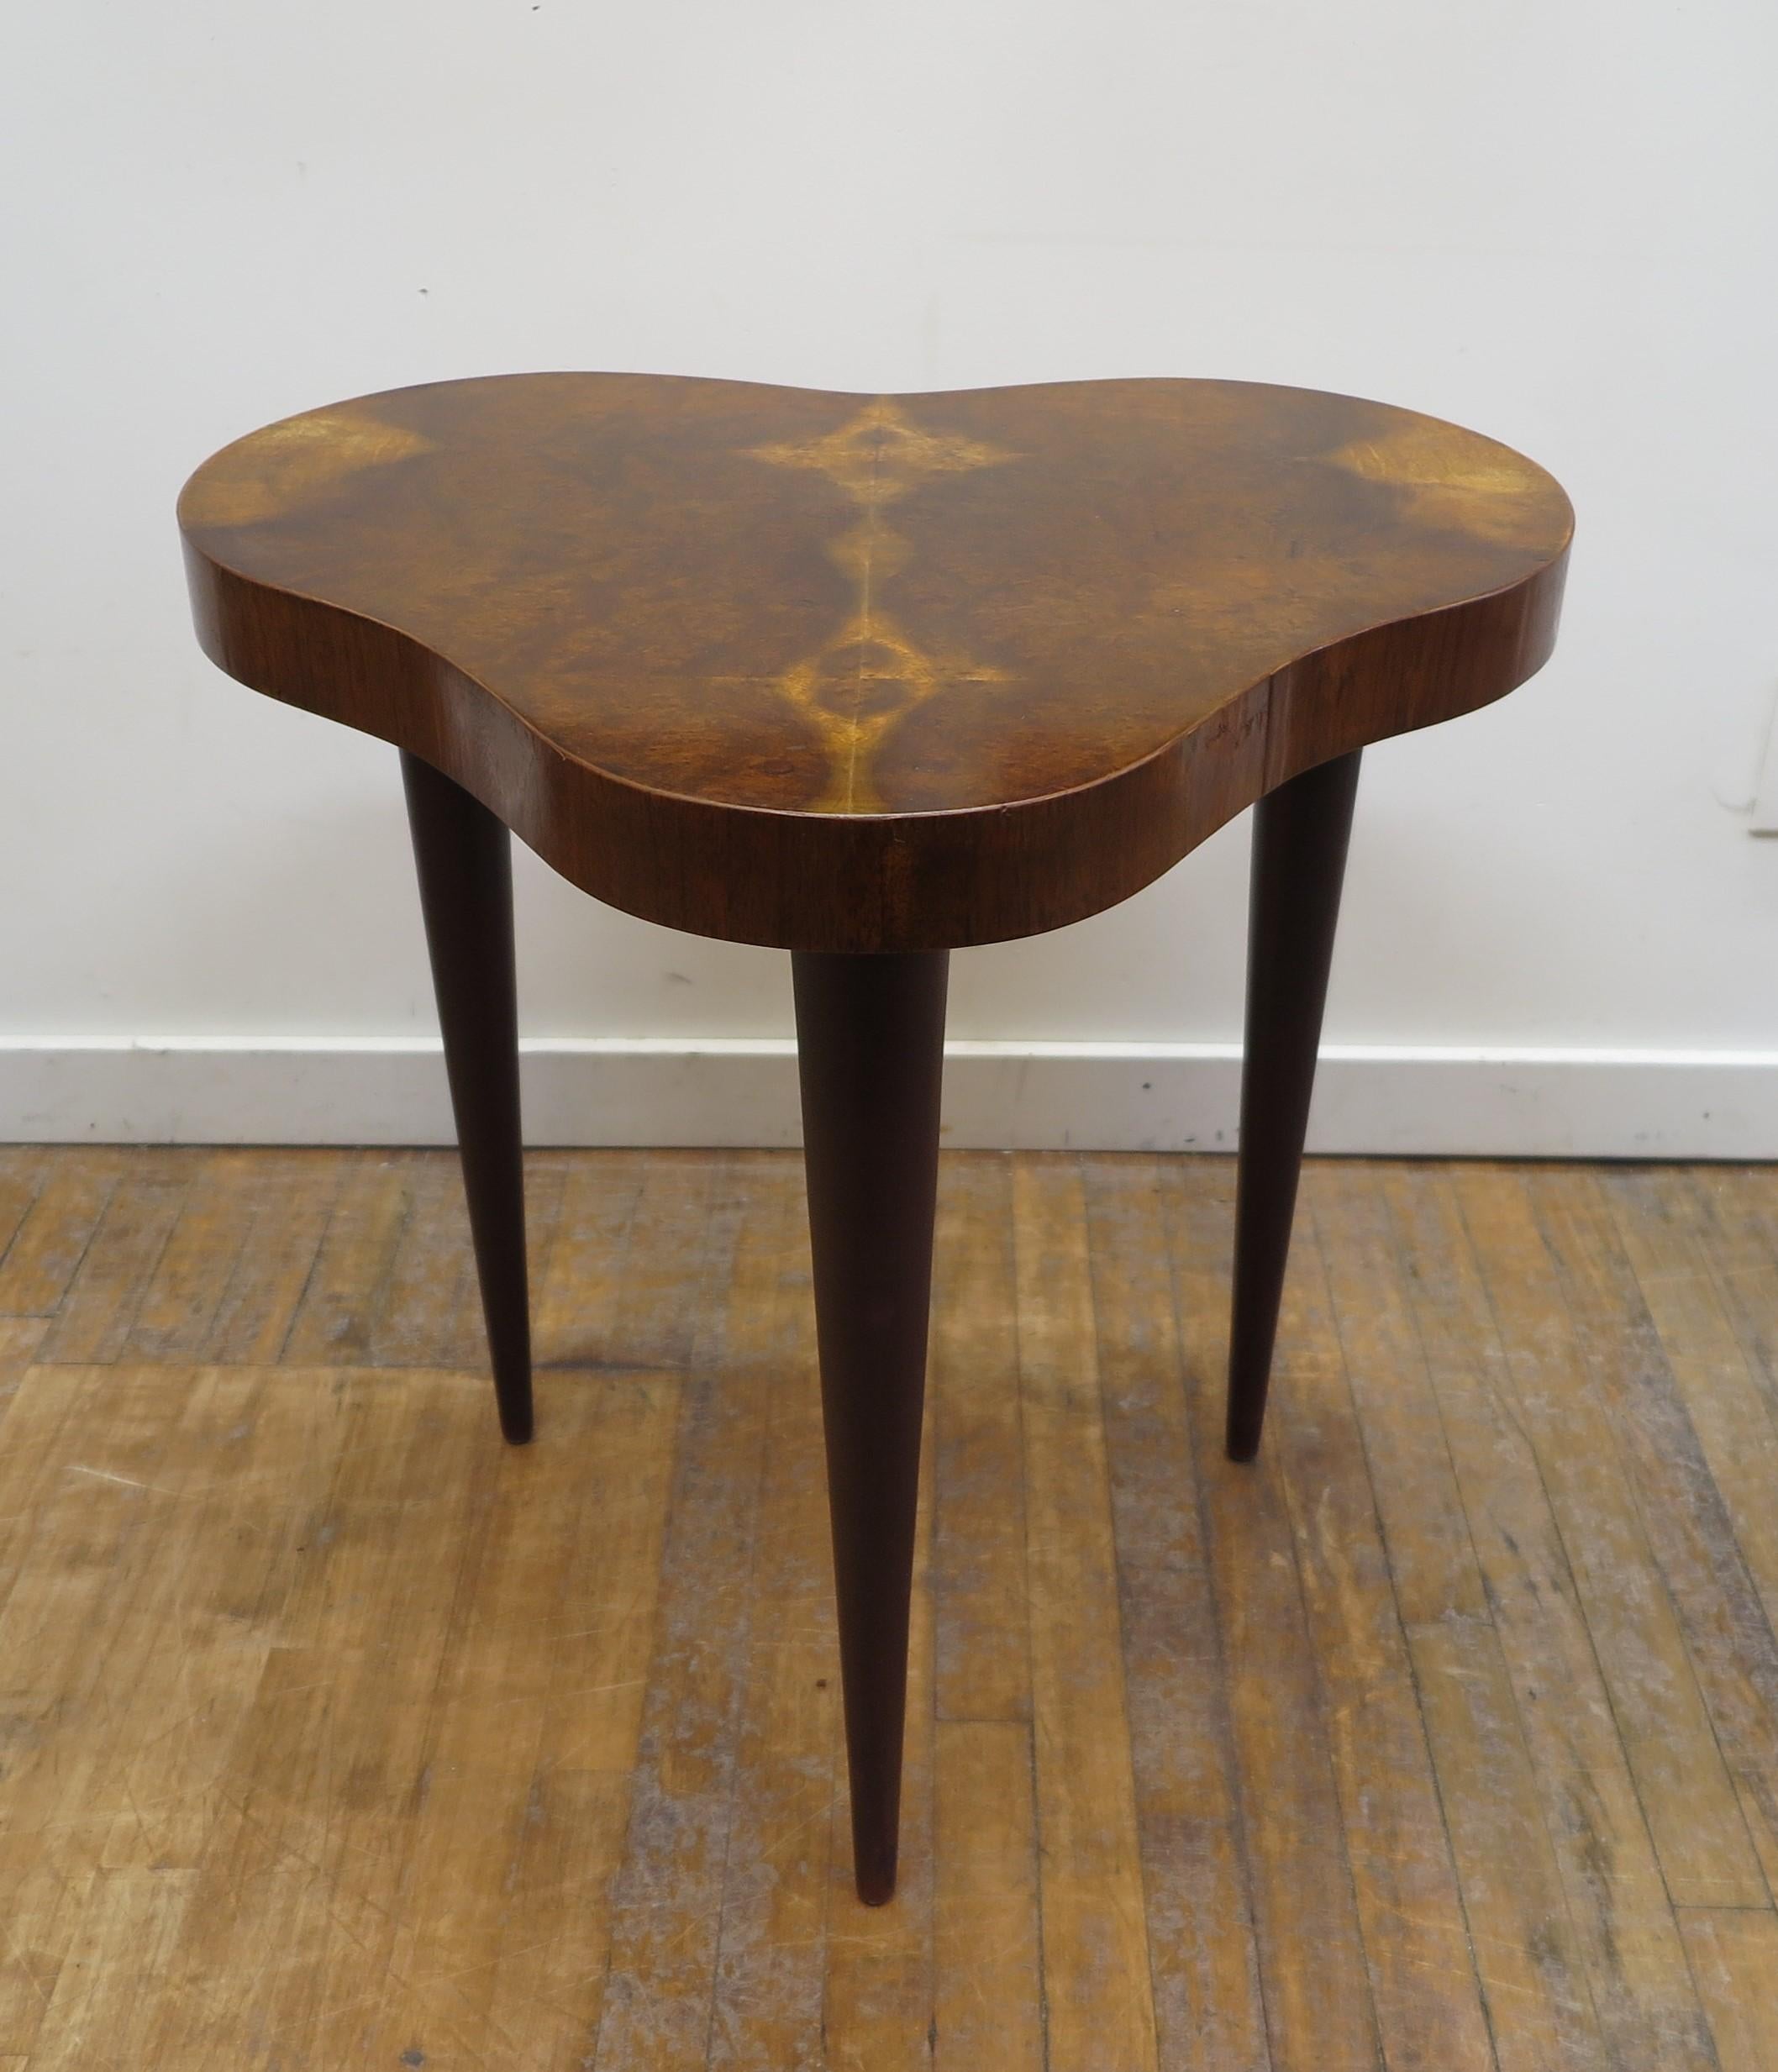 Gilbert Rohde Occasional Table Model 4187. Rare Gilbert Rohde Paldao Group biomorphic occasional table on tapered leatherette wrapped legs having the table top of book matched acacia veneer. A fantastic collectable Gilbert Rodhe for Herman Miller